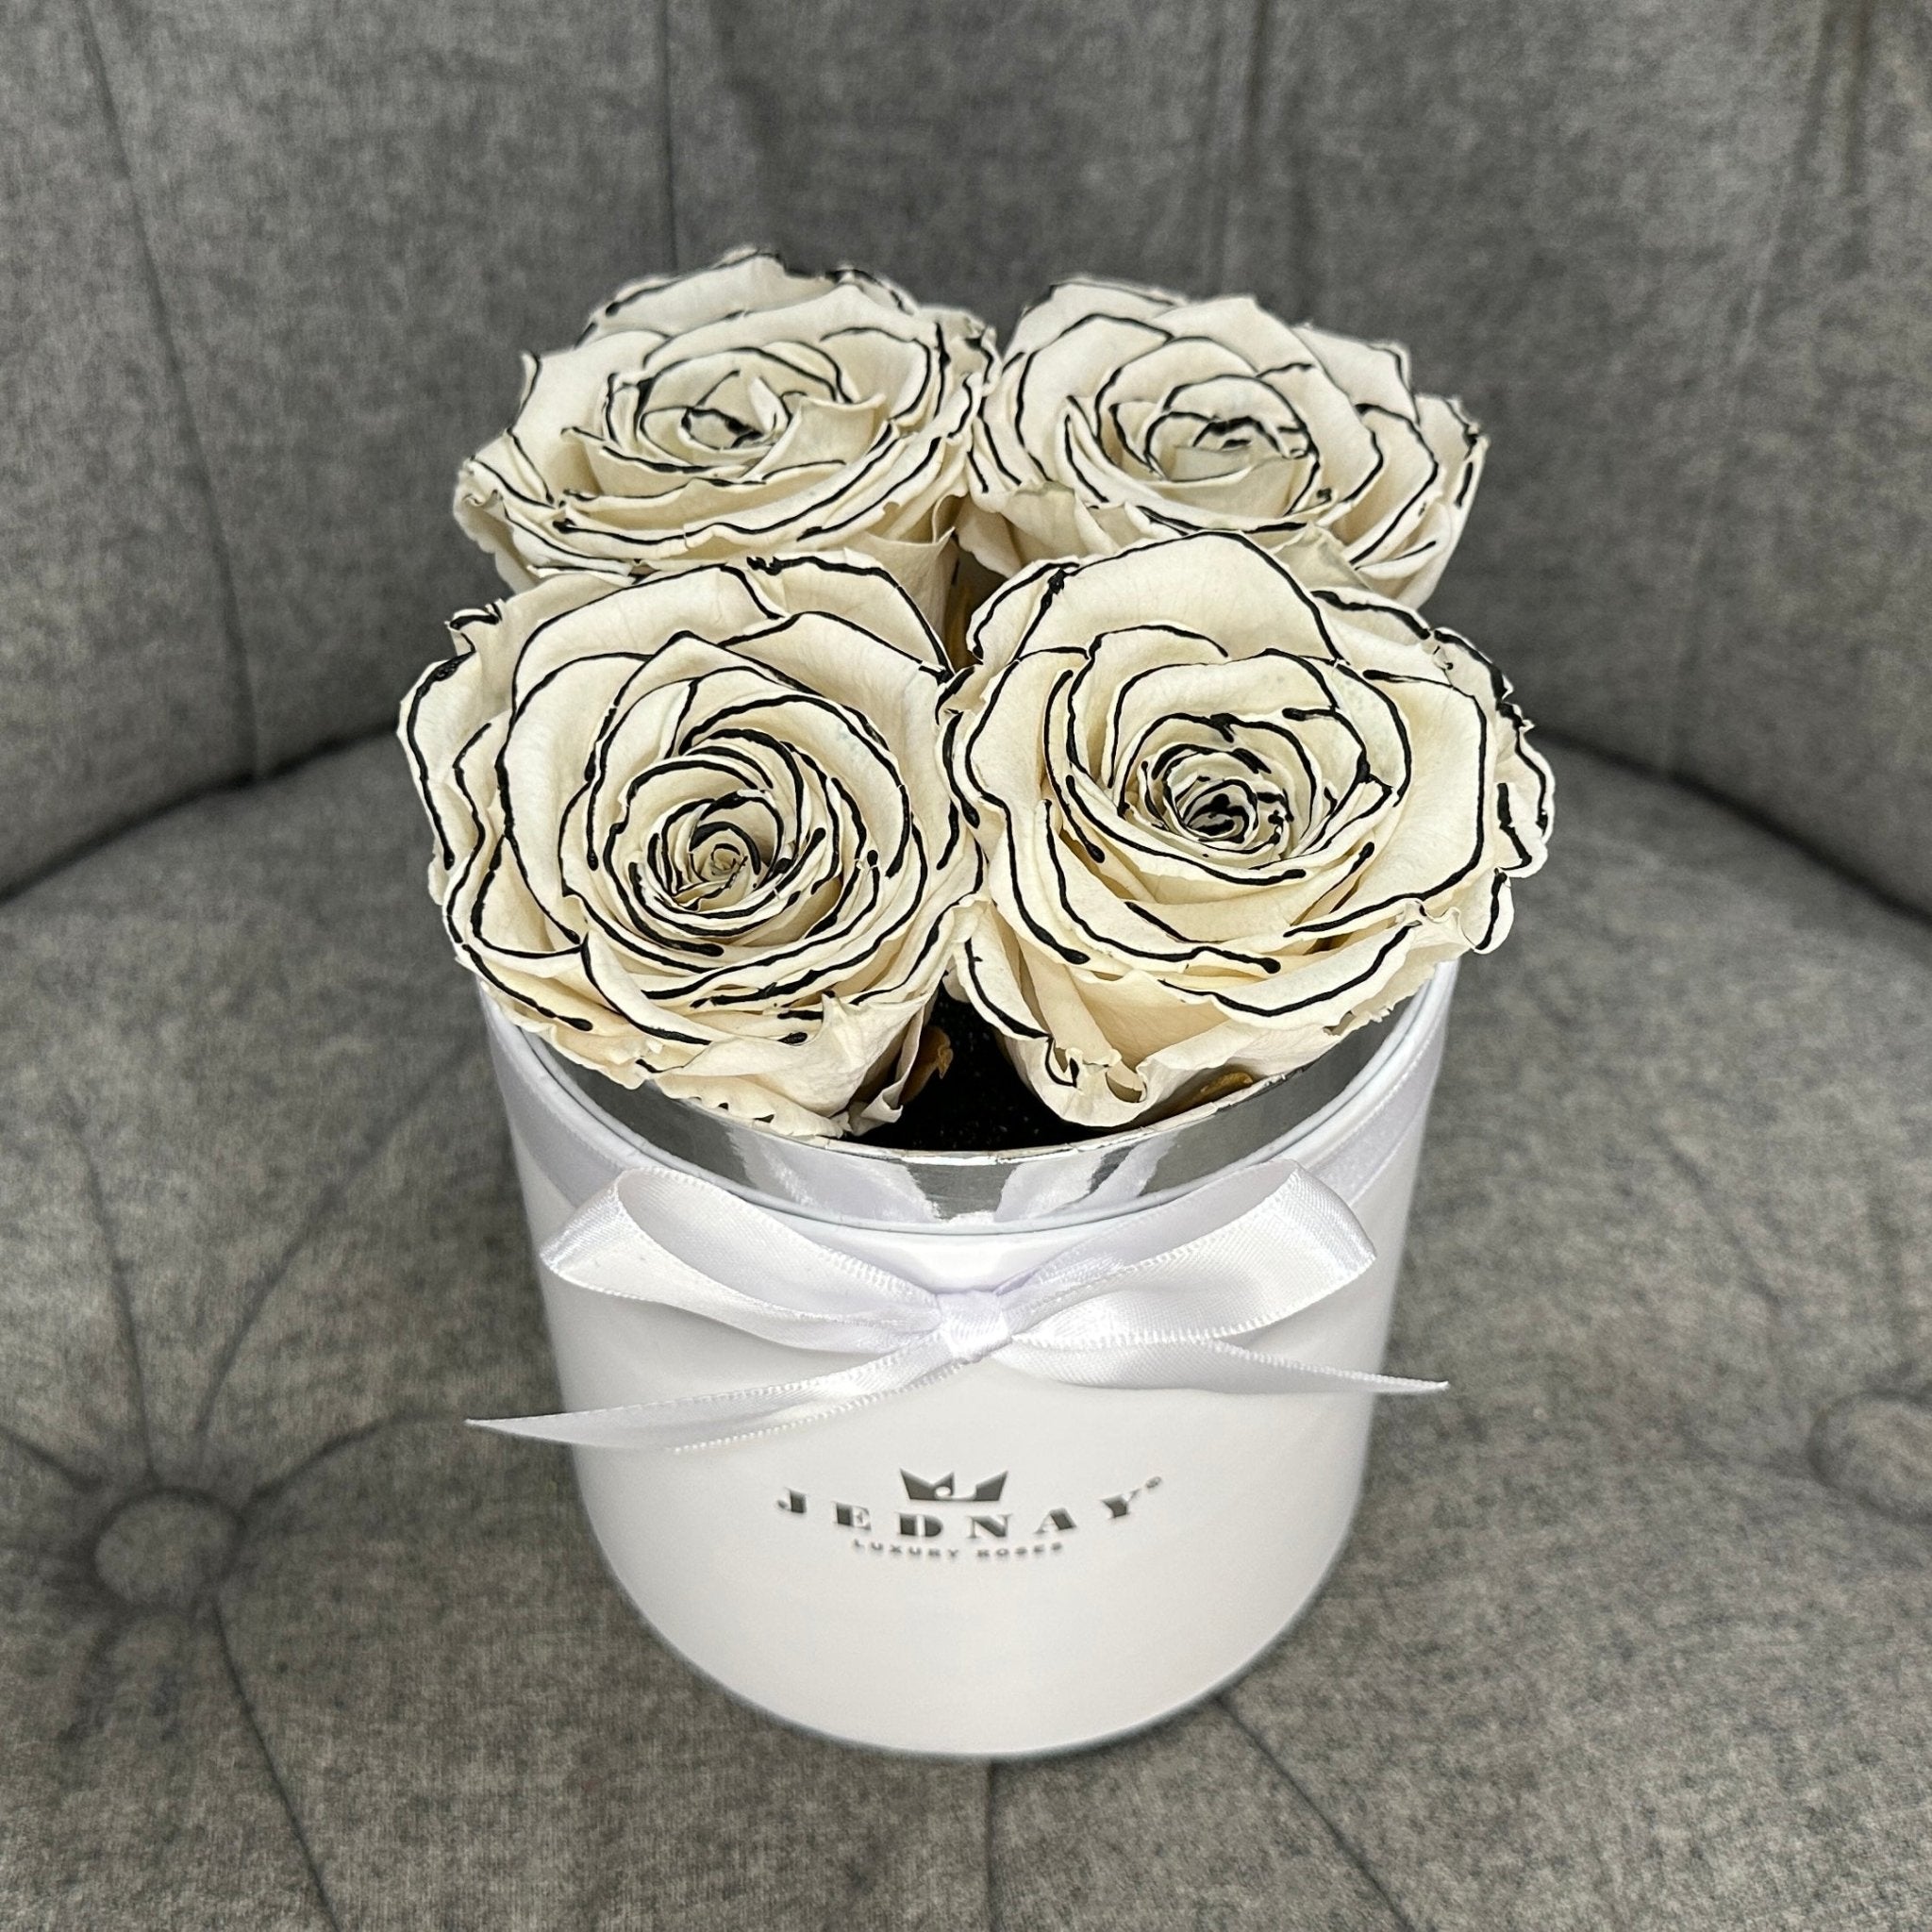 Petite Classic White Forever Rose Box - Sketchy Eternal Roses - Jednay Roses